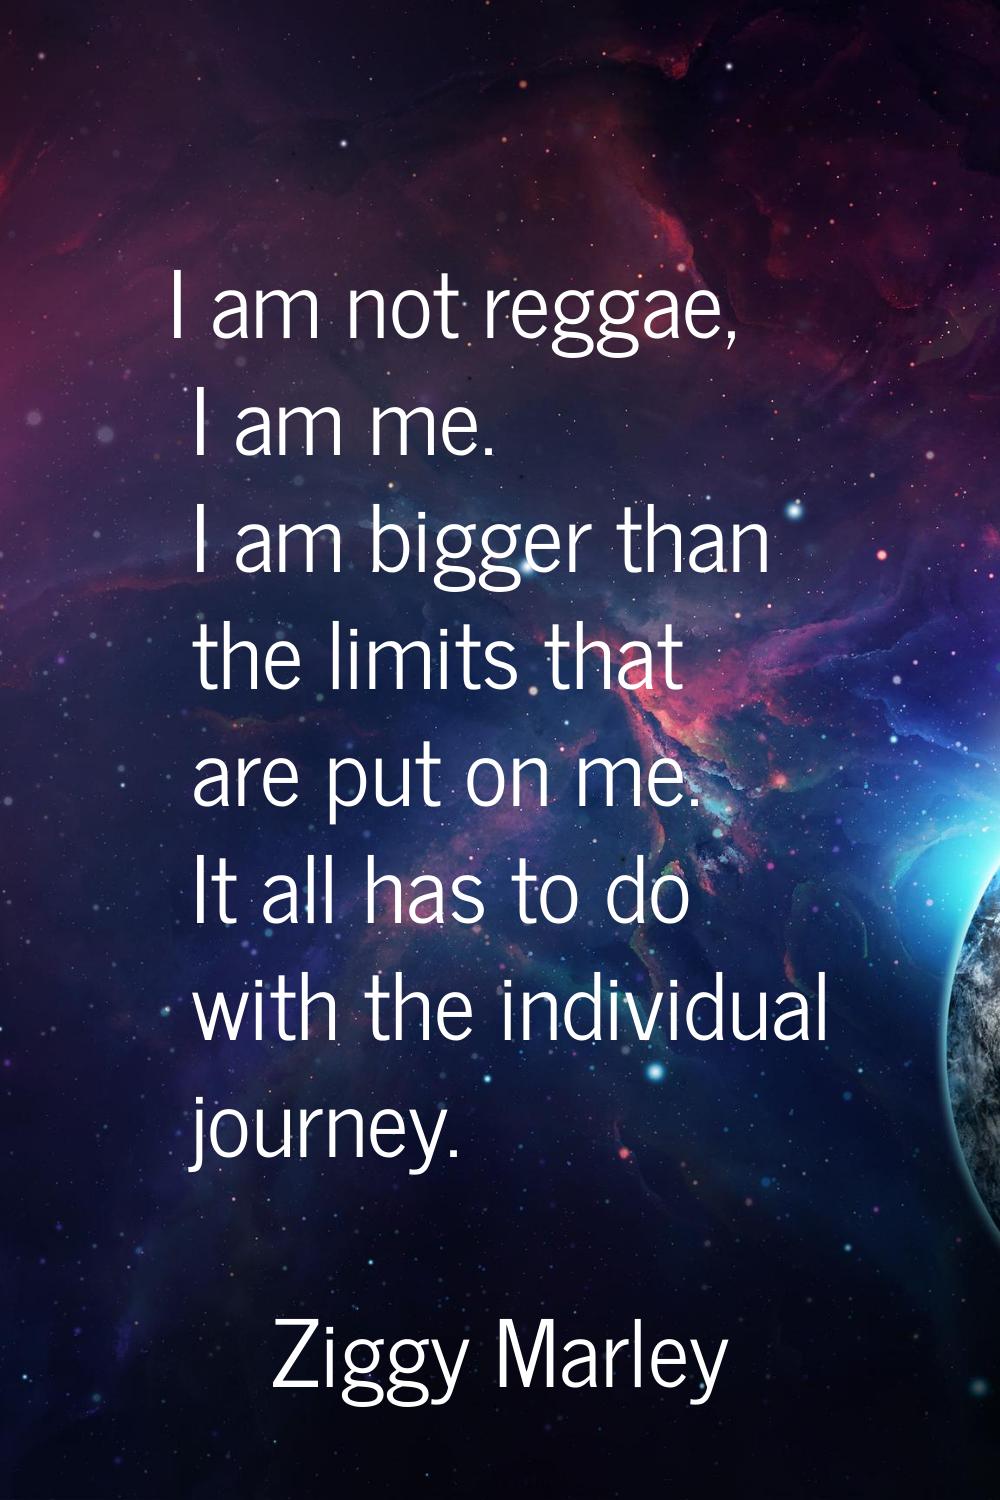 I am not reggae, I am me. I am bigger than the limits that are put on me. It all has to do with the